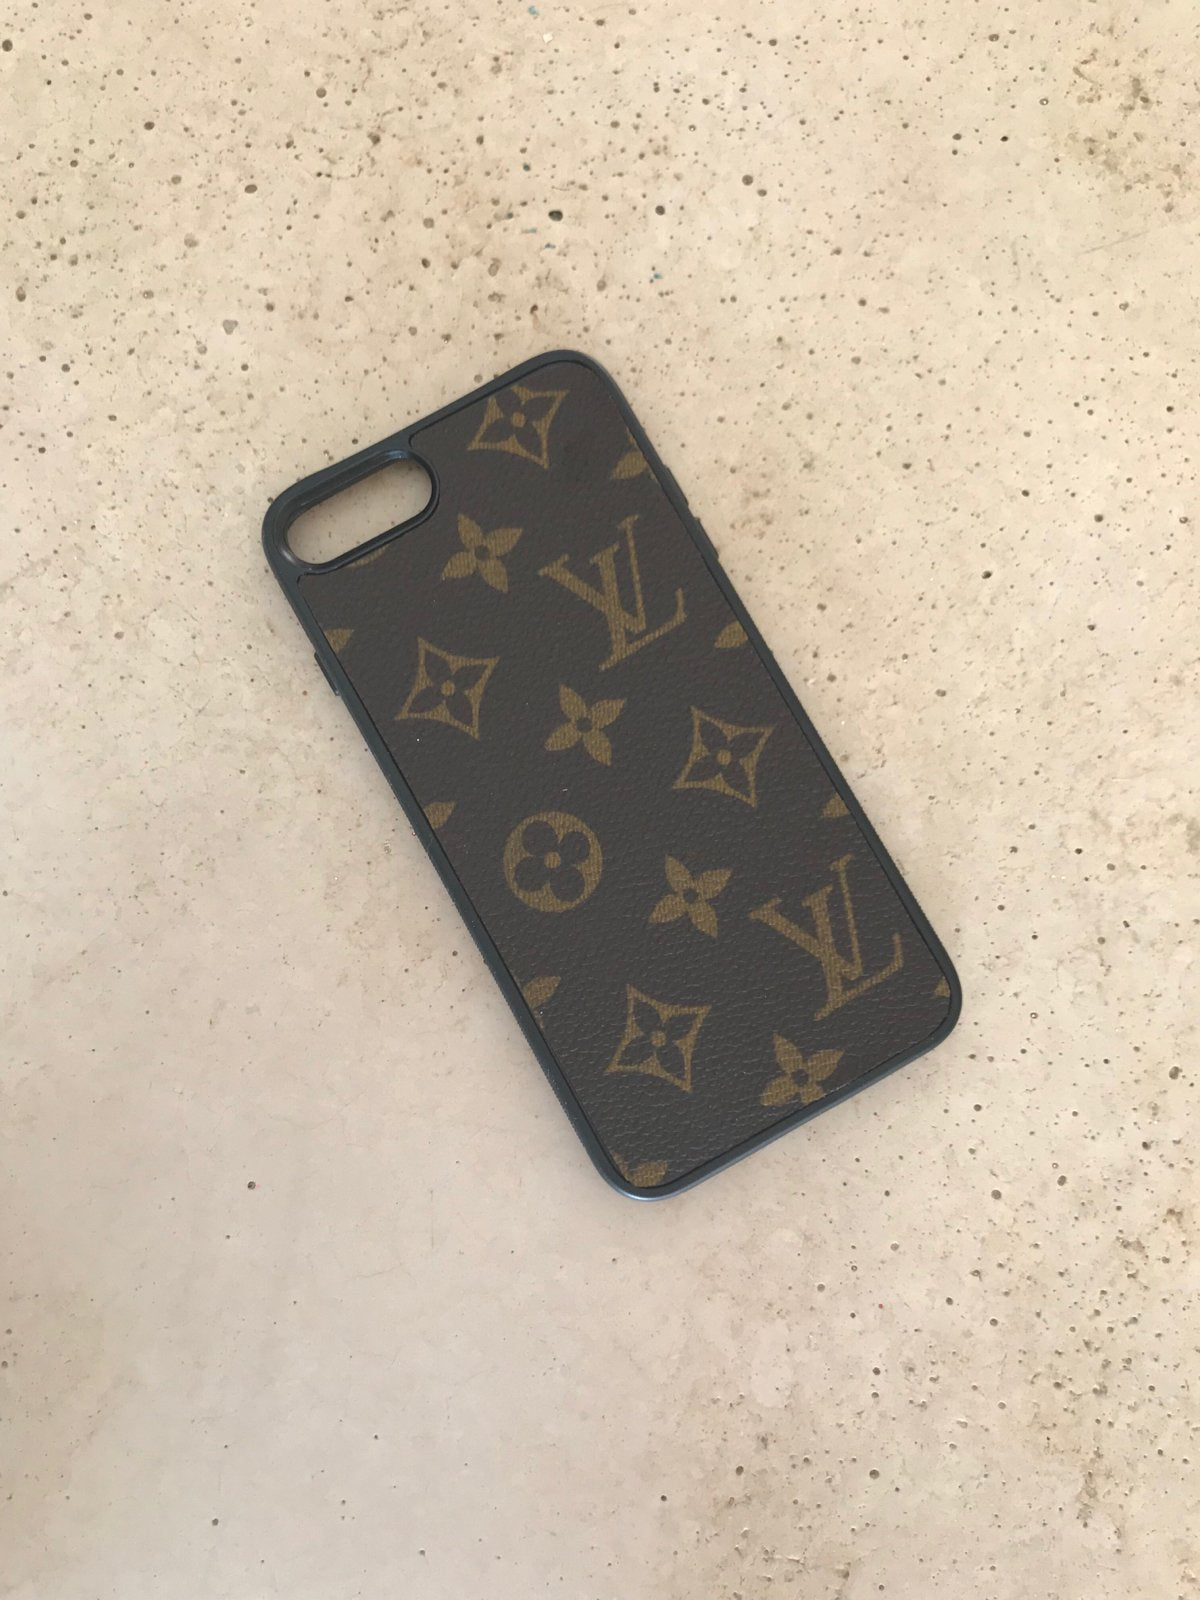 Case for iPhone 8 - Louis Vuitton Gold